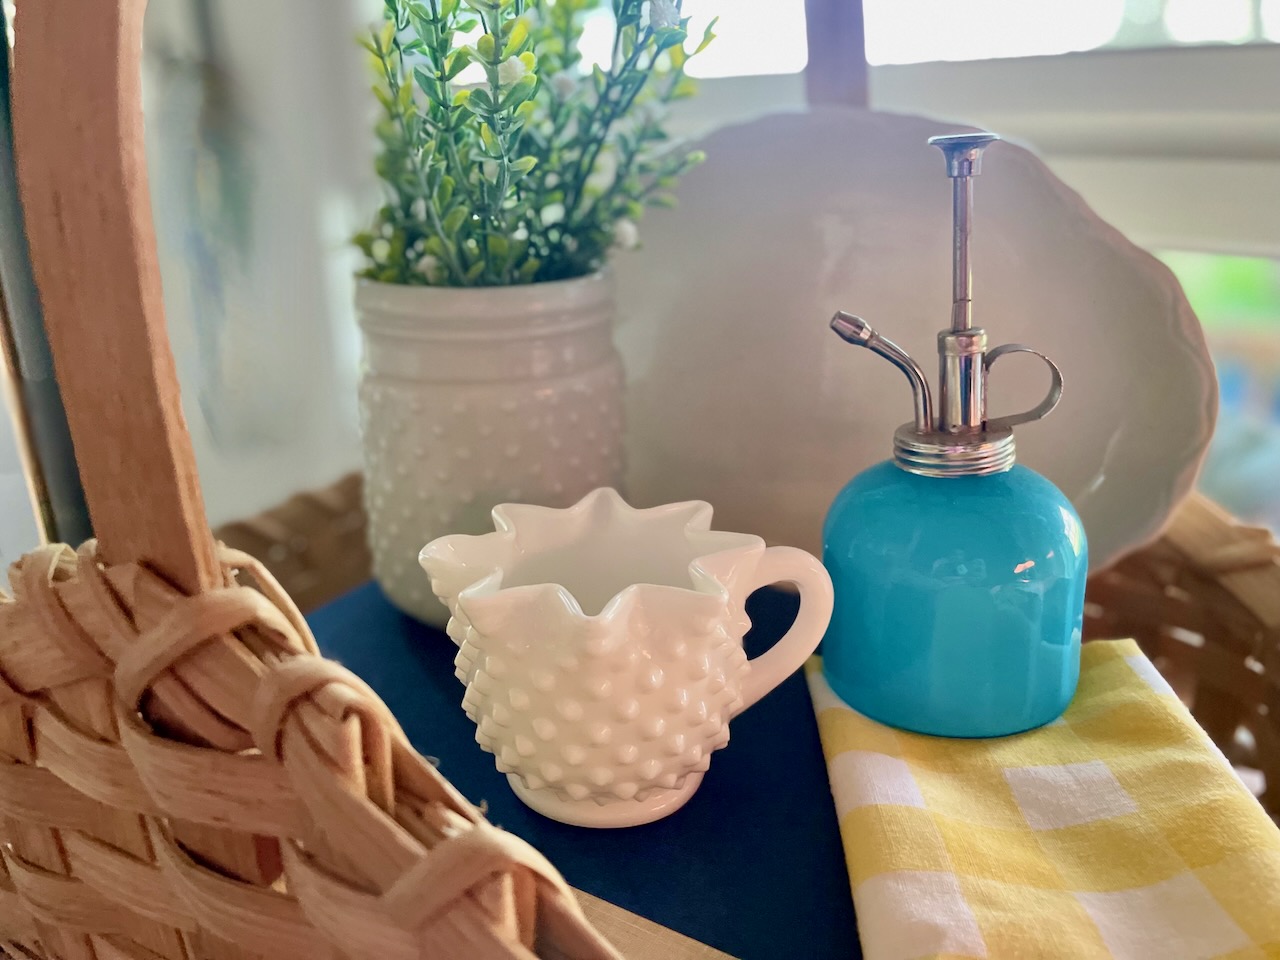 a basket vignette with thrifted Summer decor